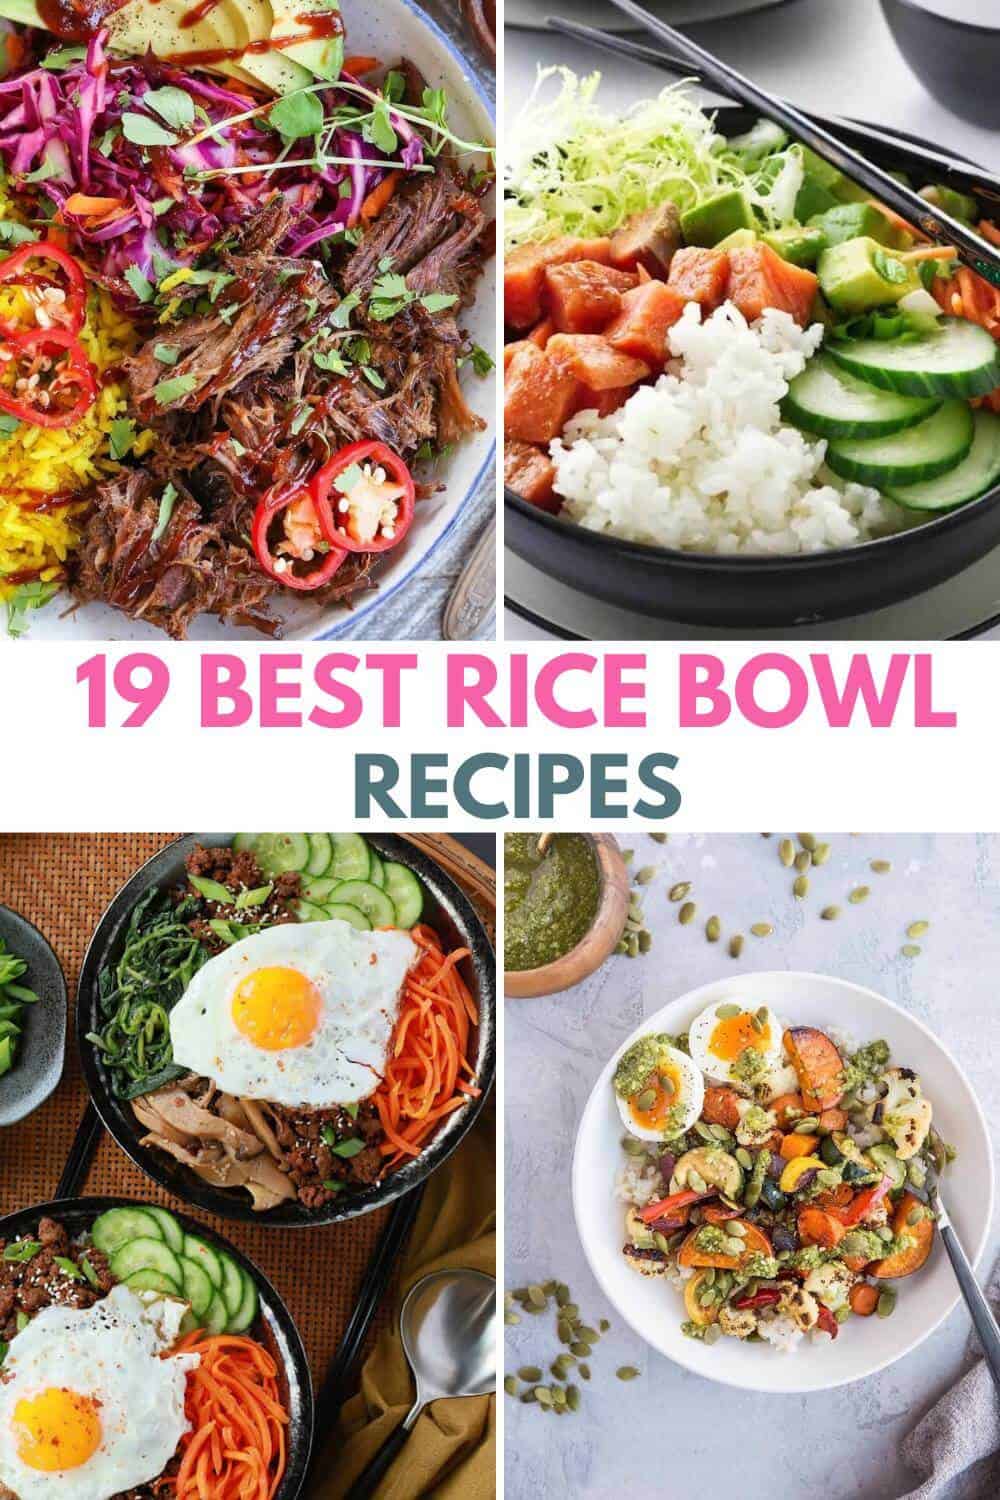 Collage of 4 rice bowls for the 19 best rice bowl recipes